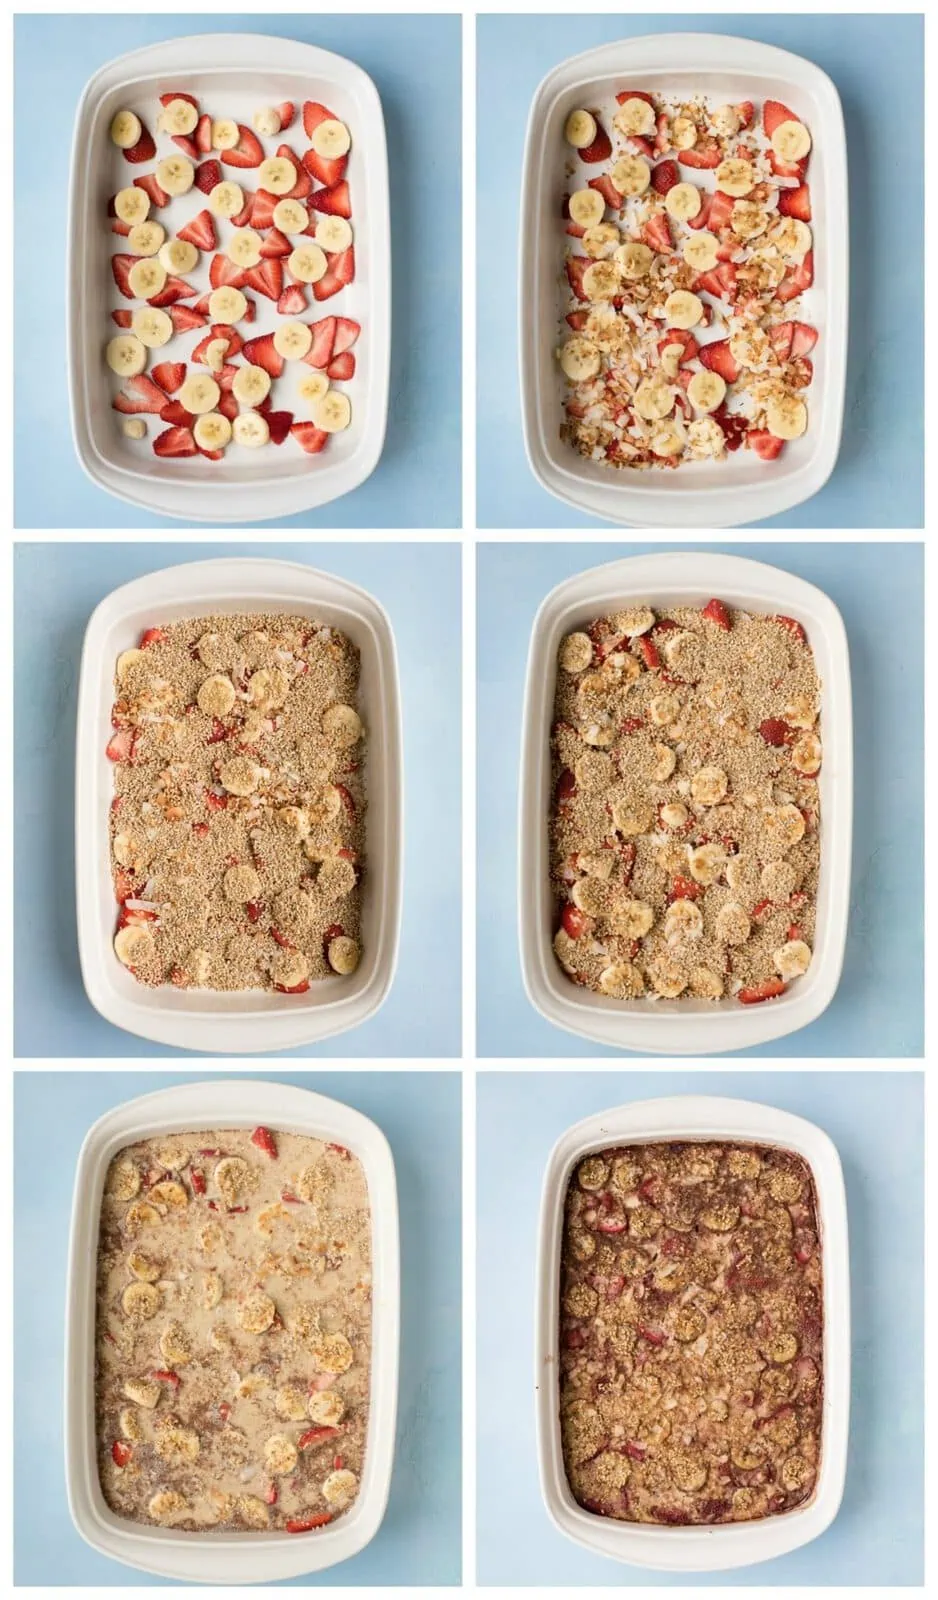 strawberry banana steel cut oat bake process step pictures